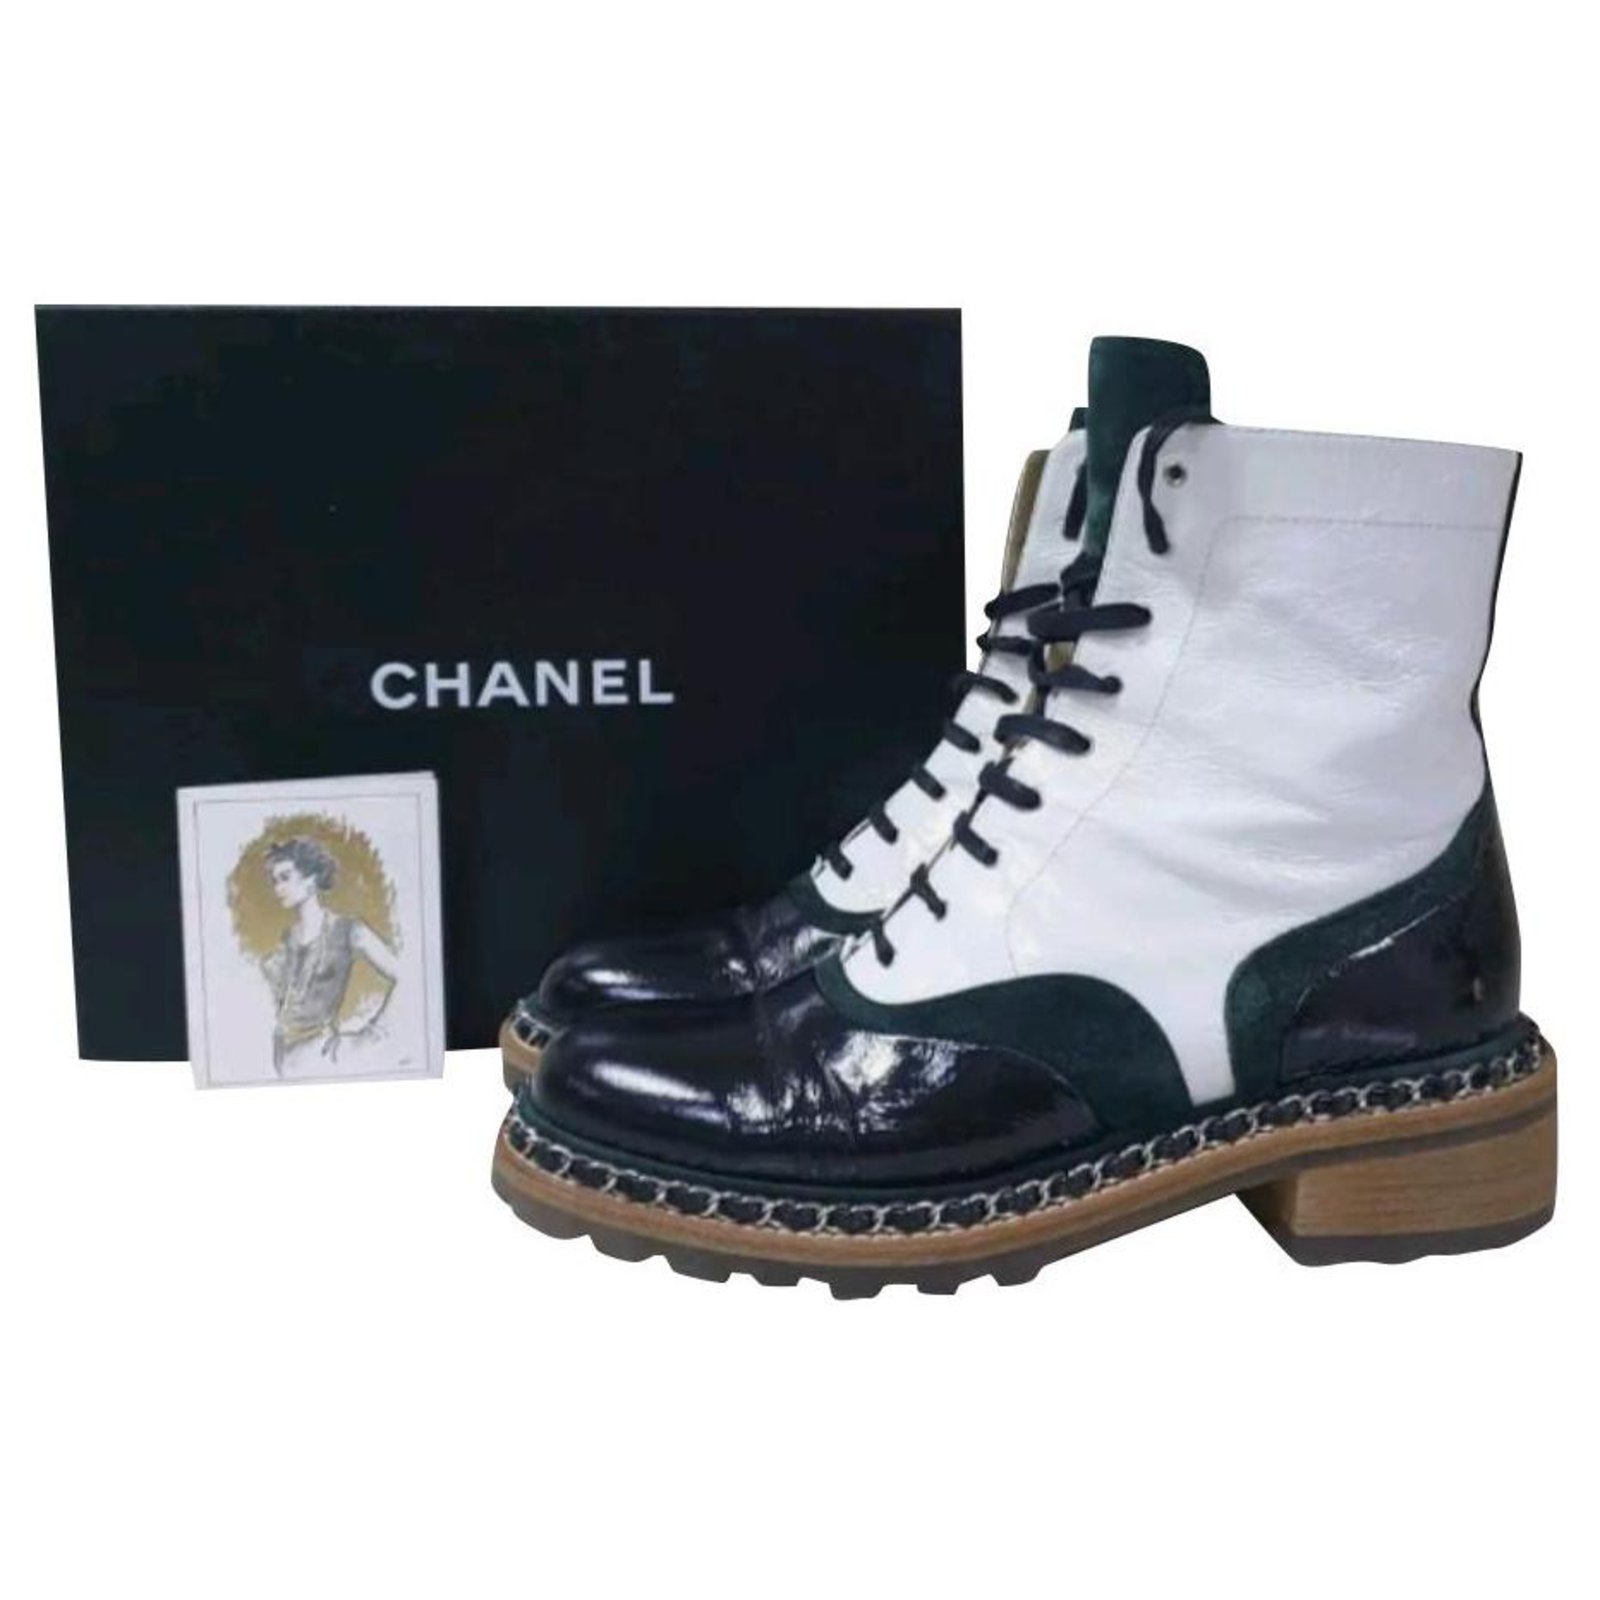 CHANEL  Shoes  Chanel White Black Short Boots Made In Italy  Poshmark